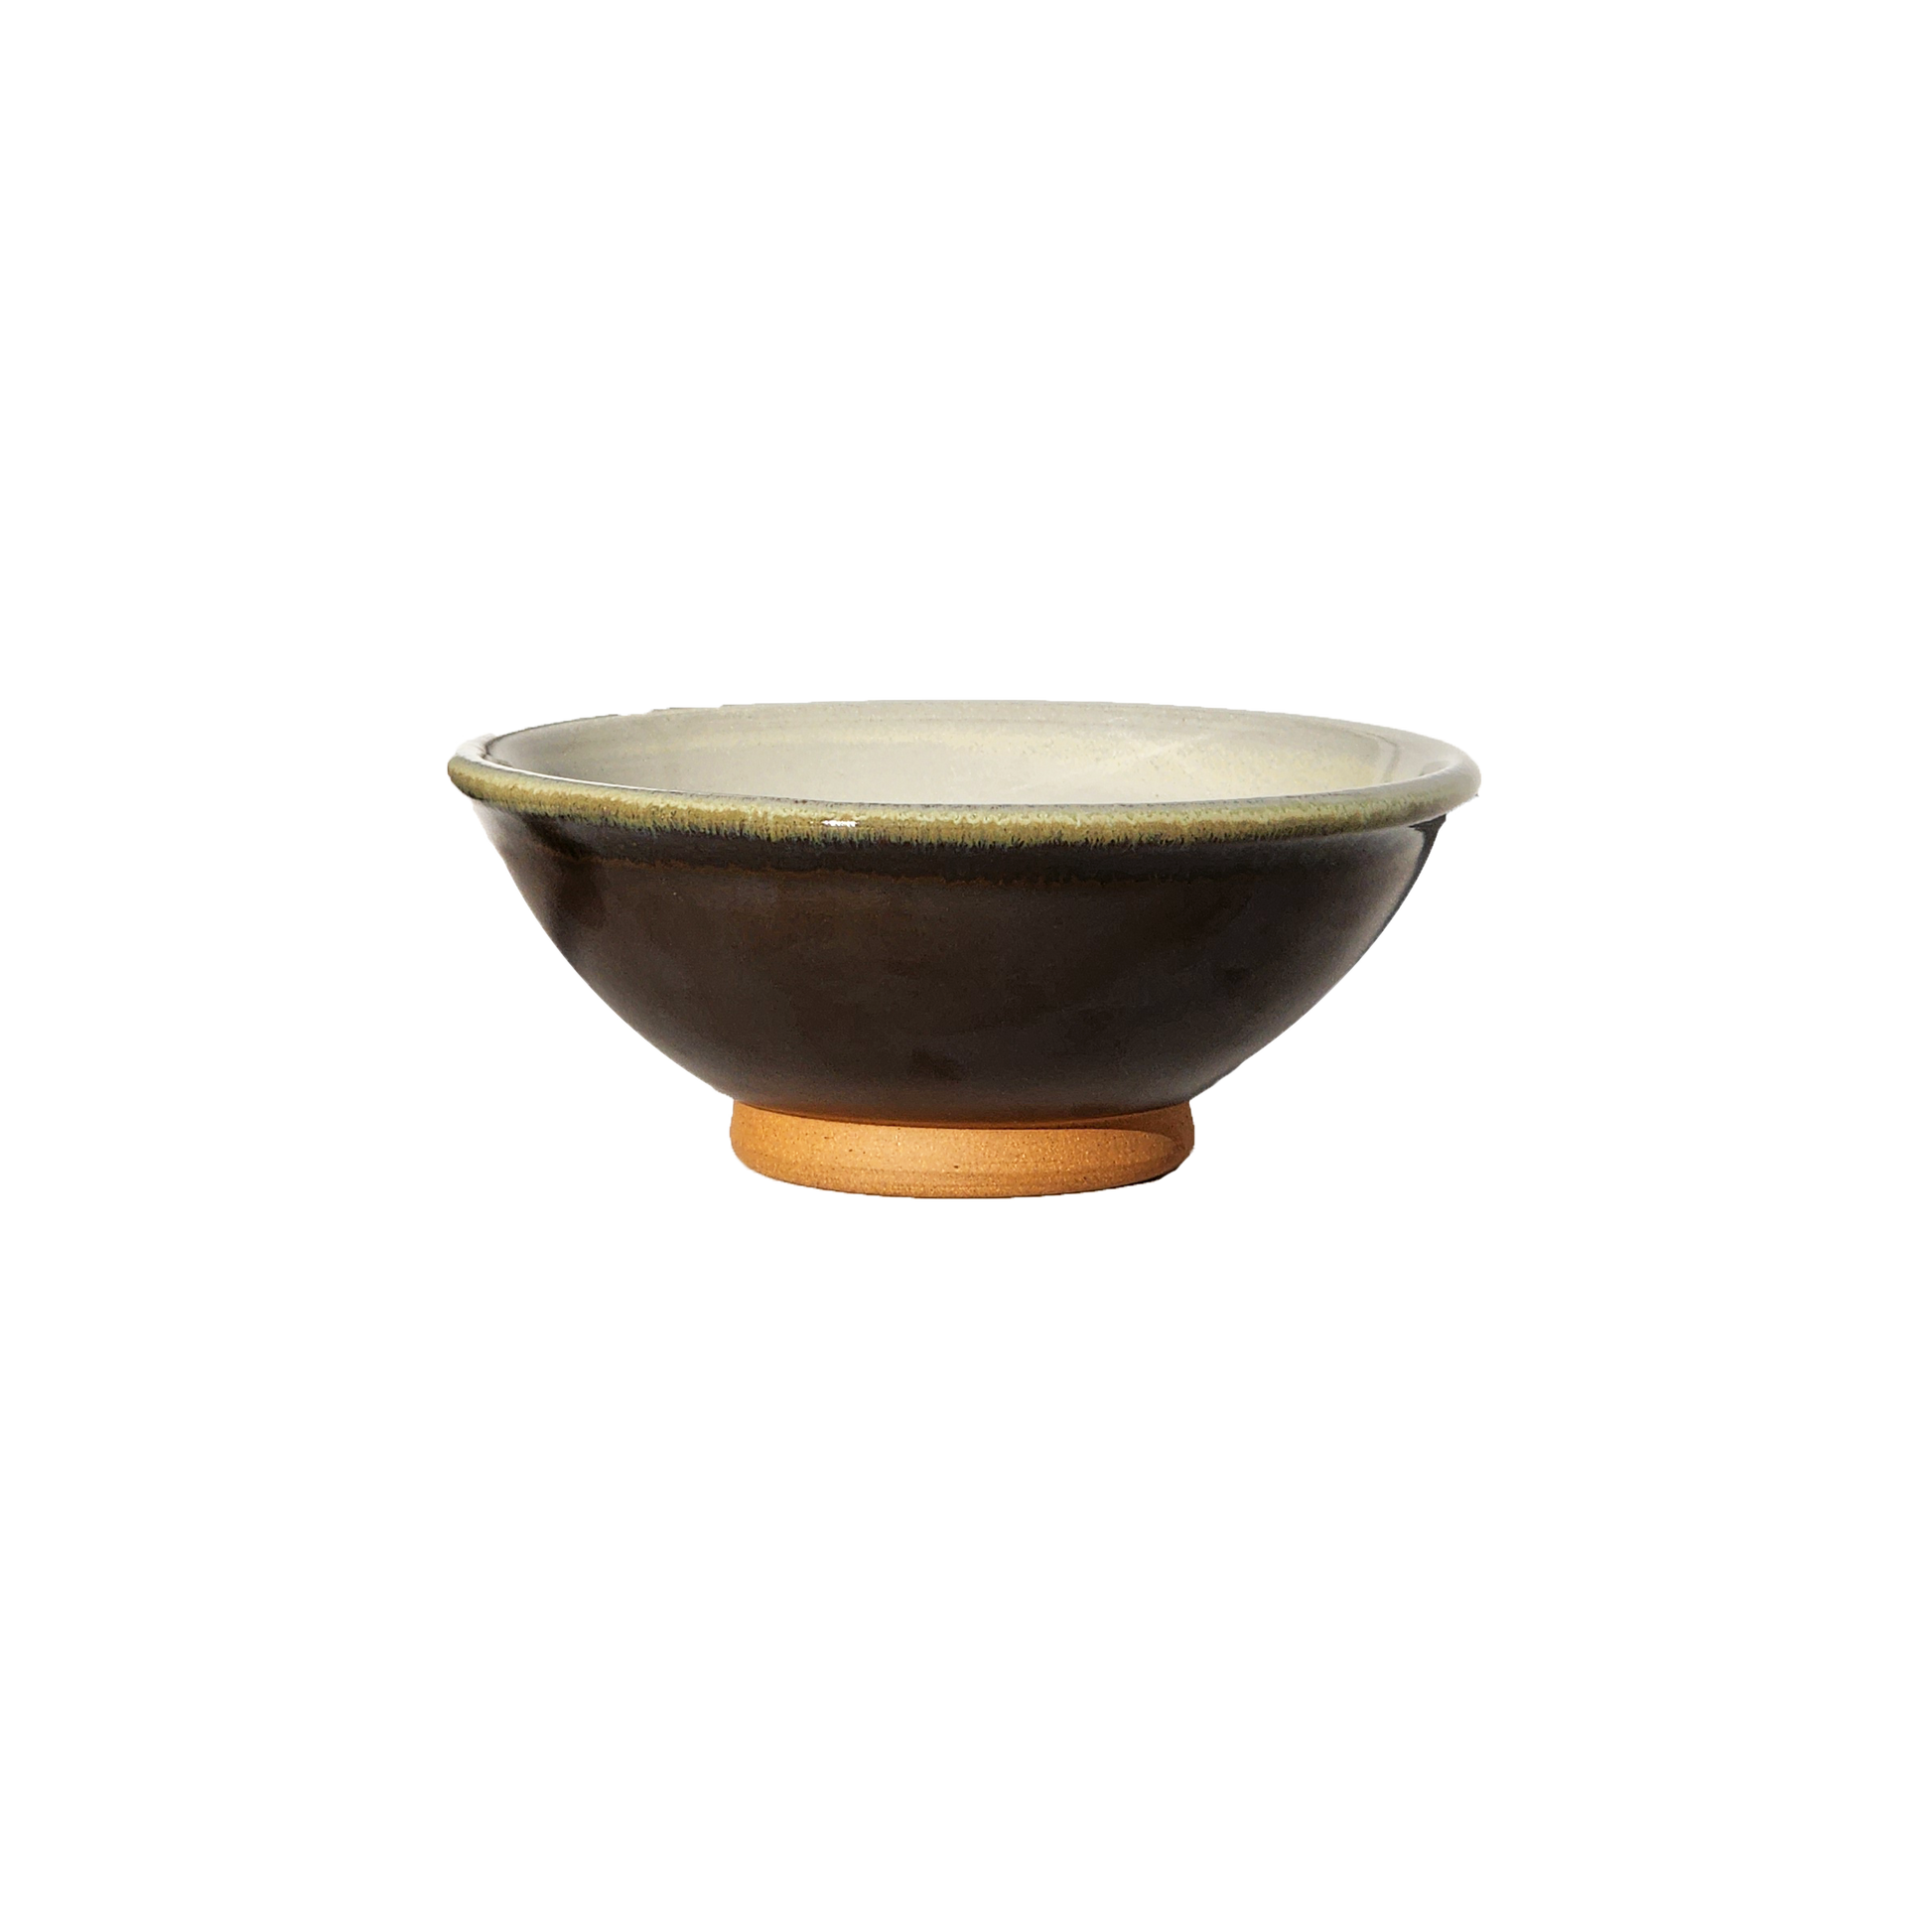 Image: A small mixing bowl in a sophisticated licorice hue, offering a capacity of 2.25 cups. Perfect for ingredients, snacks, or condiments, this bowl adds a sleek and modern touch to your kitchen ensemble.